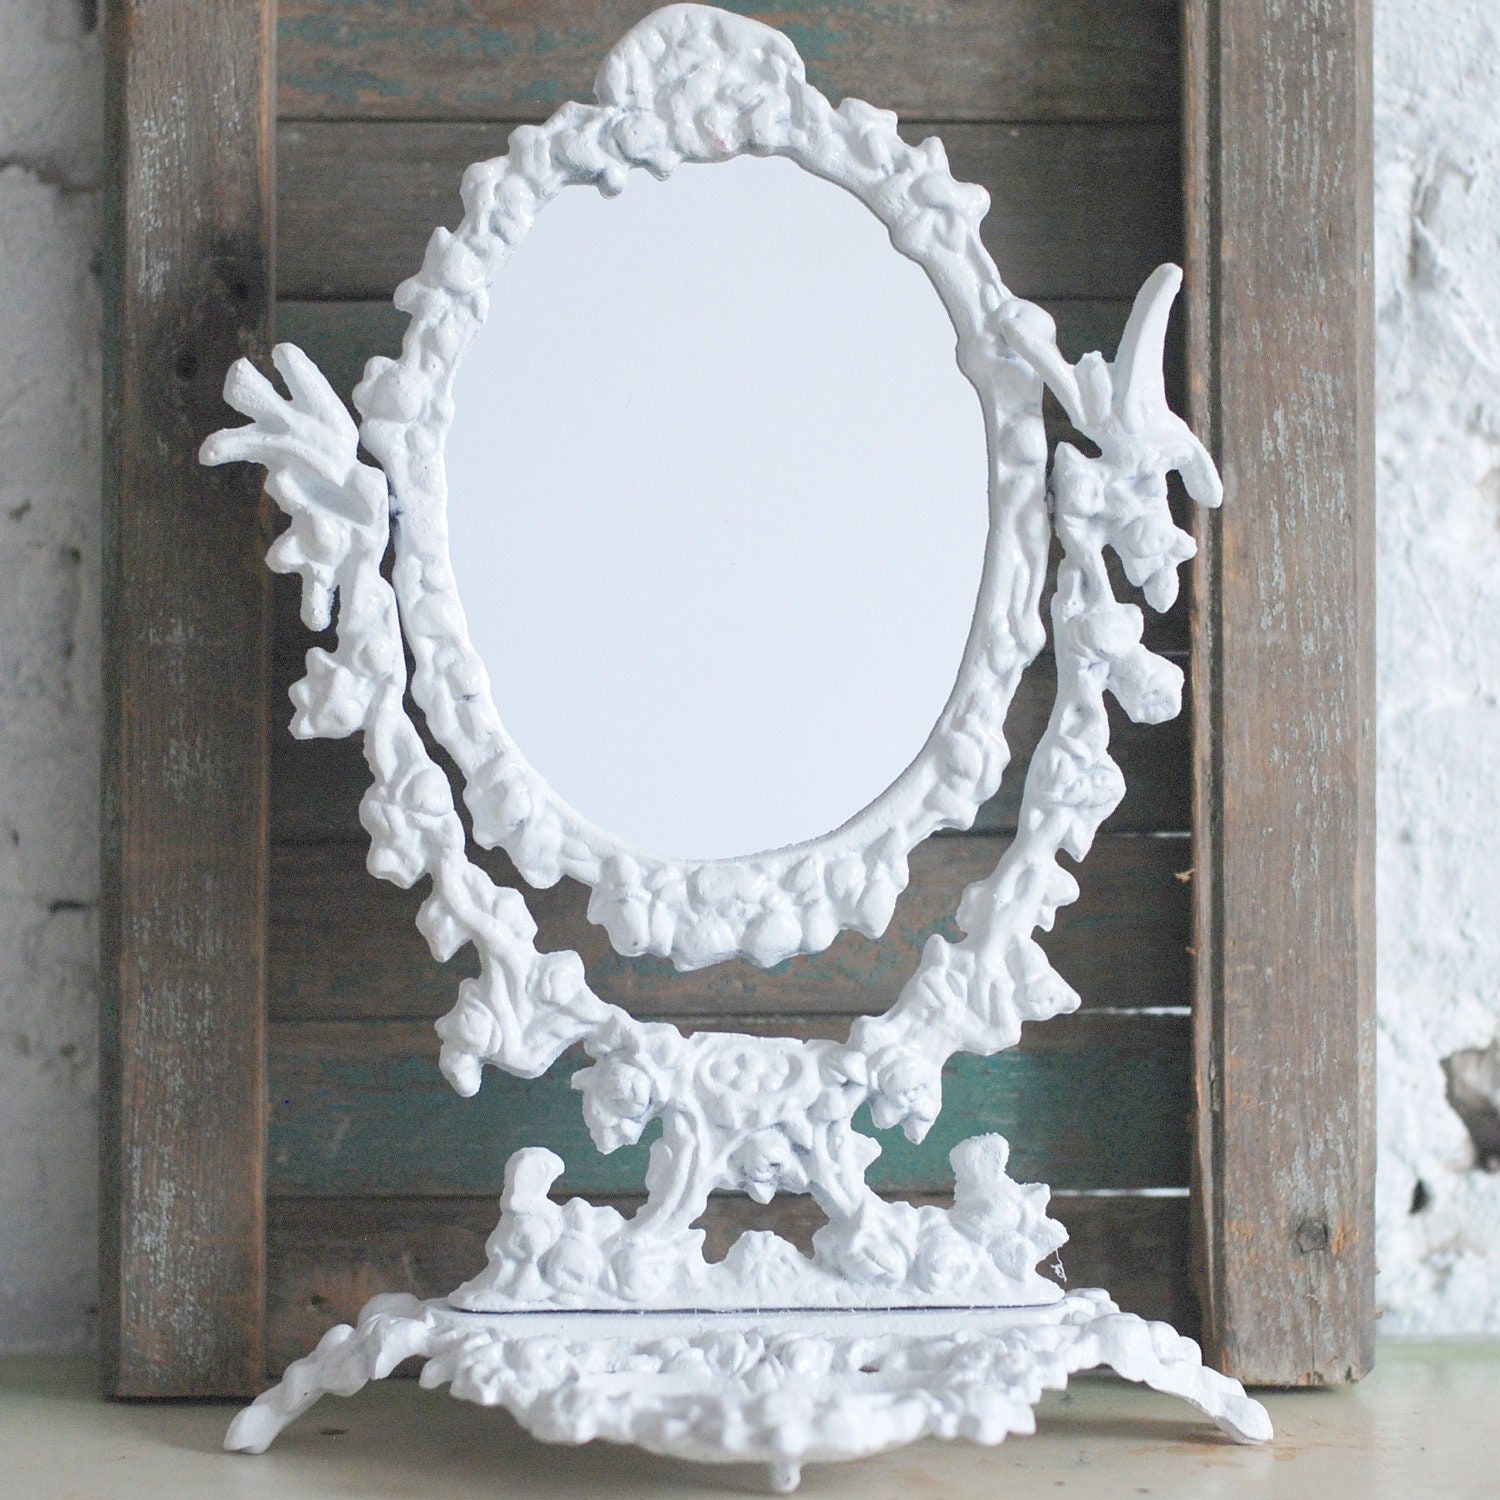 Antique Ornate Metal Pedestal Mirror / Stand Alone Frame Within Antique Brass Standing Mirrors (View 4 of 15)